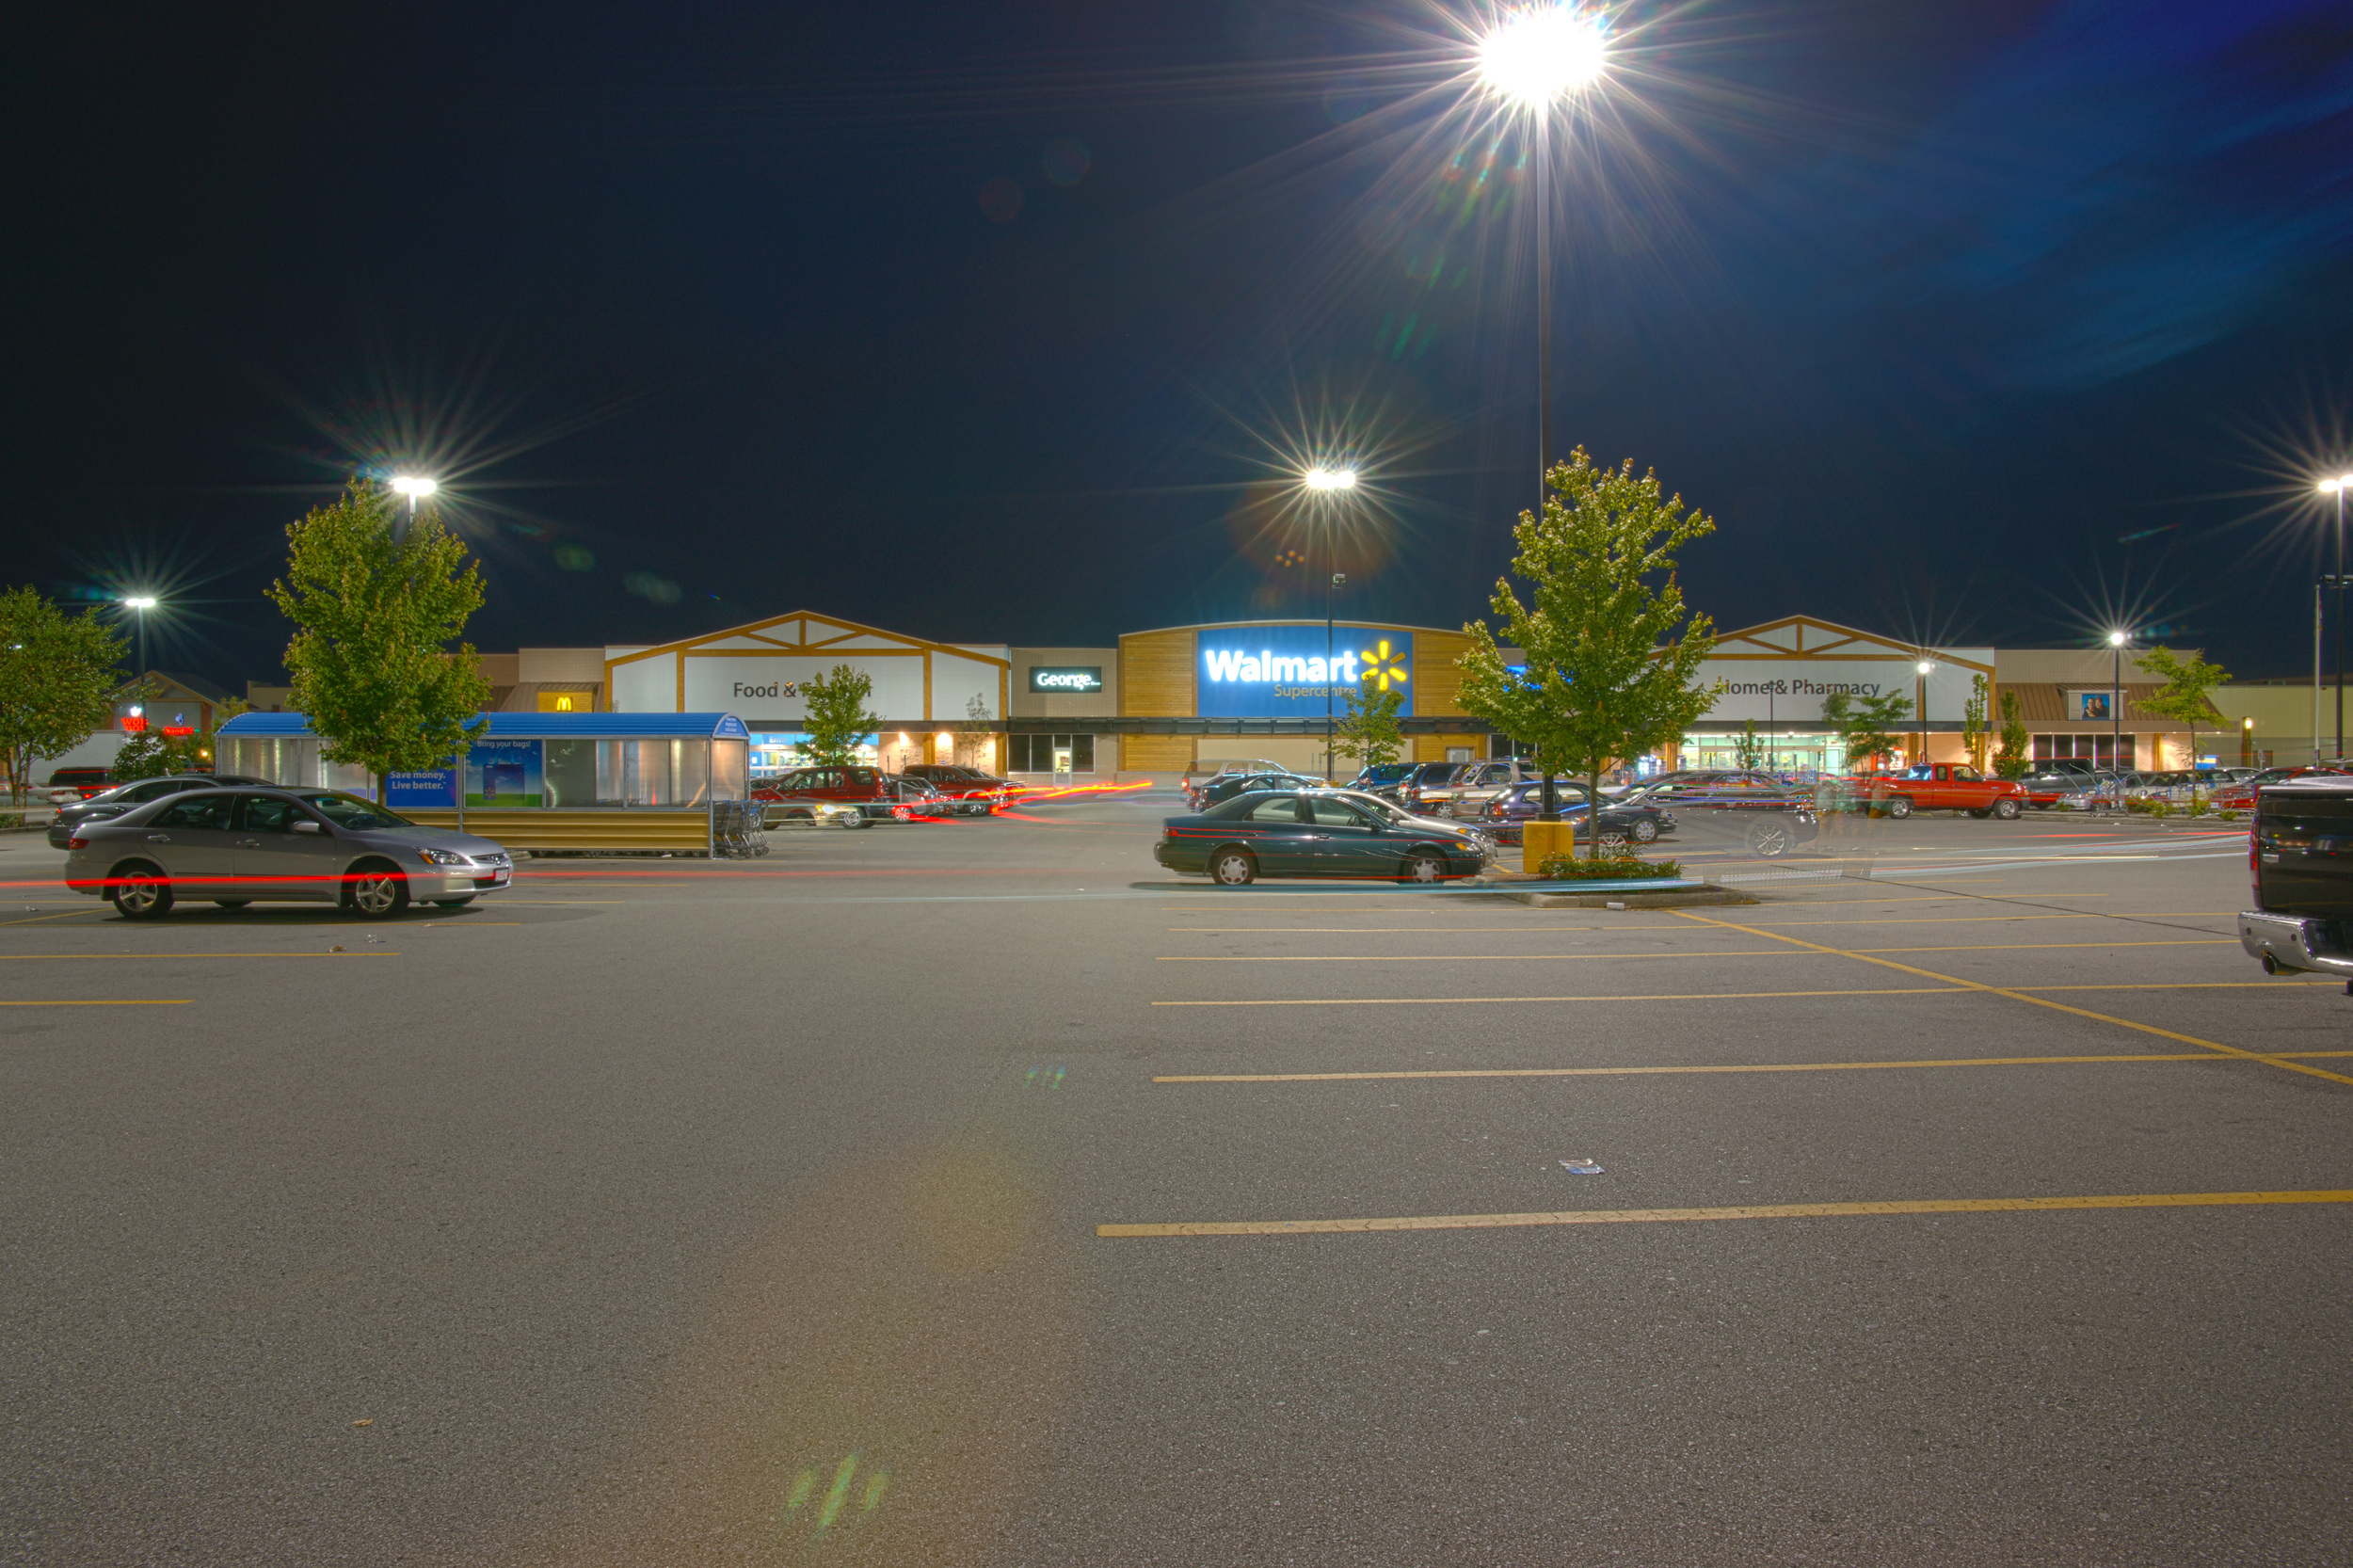 night shoppers (image 1 of 2)